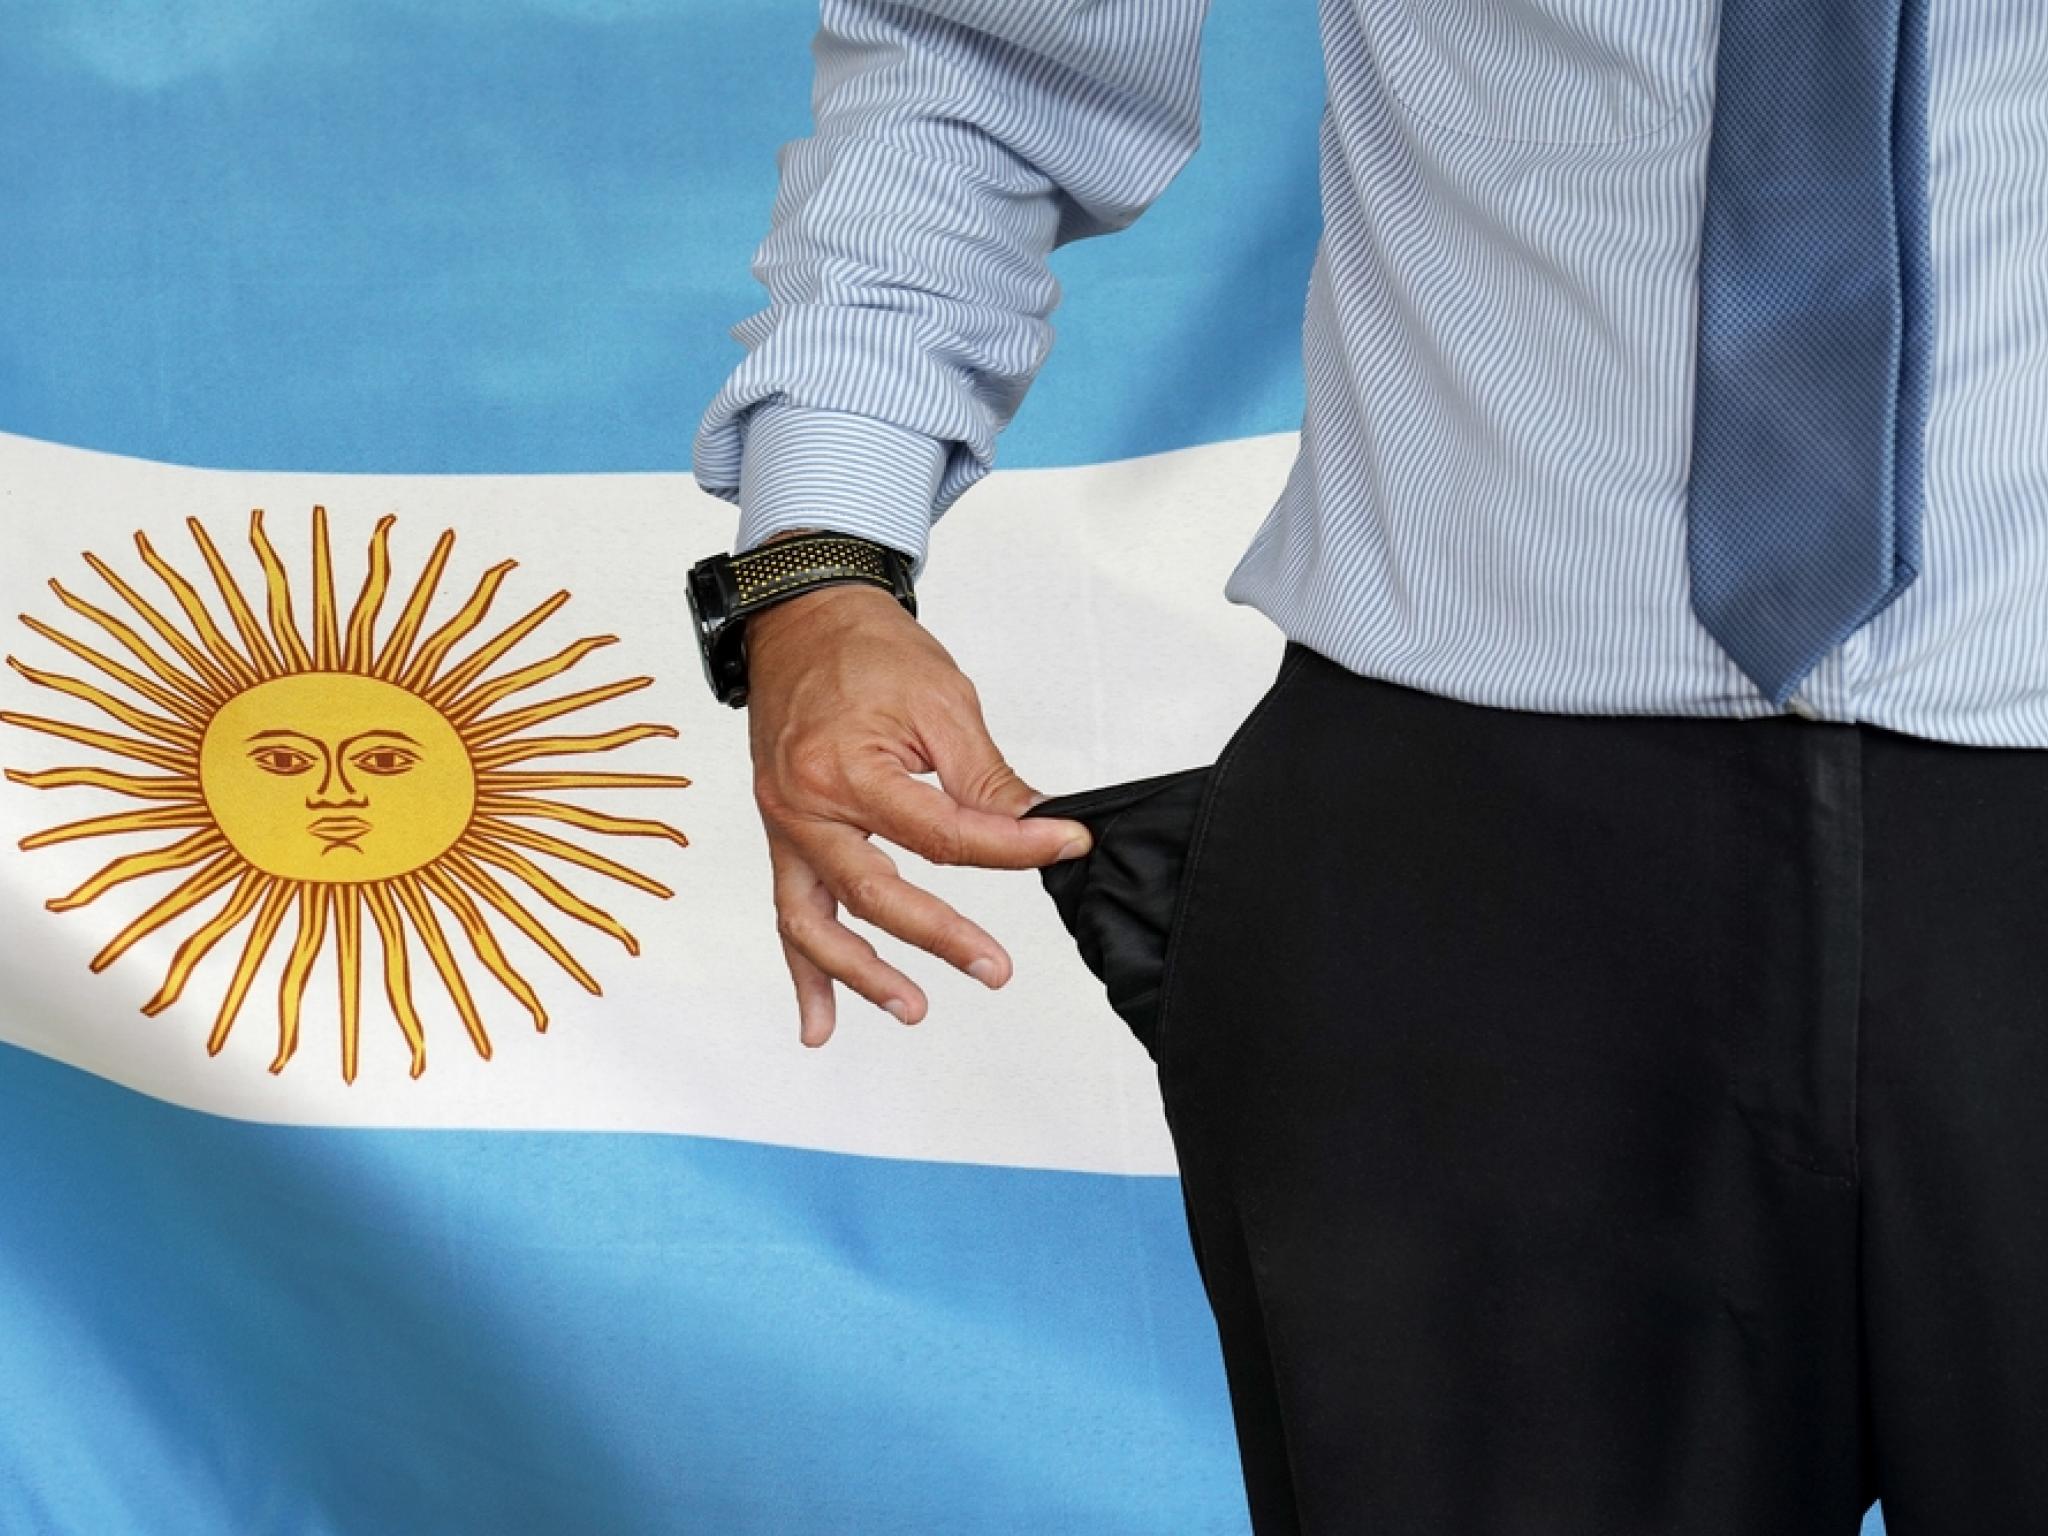  argentinas-inflation-was-around-200-in-2023--and-it-could-get-worse-in-2024-new-leadership-says-it-will-take-time-to-reverse 